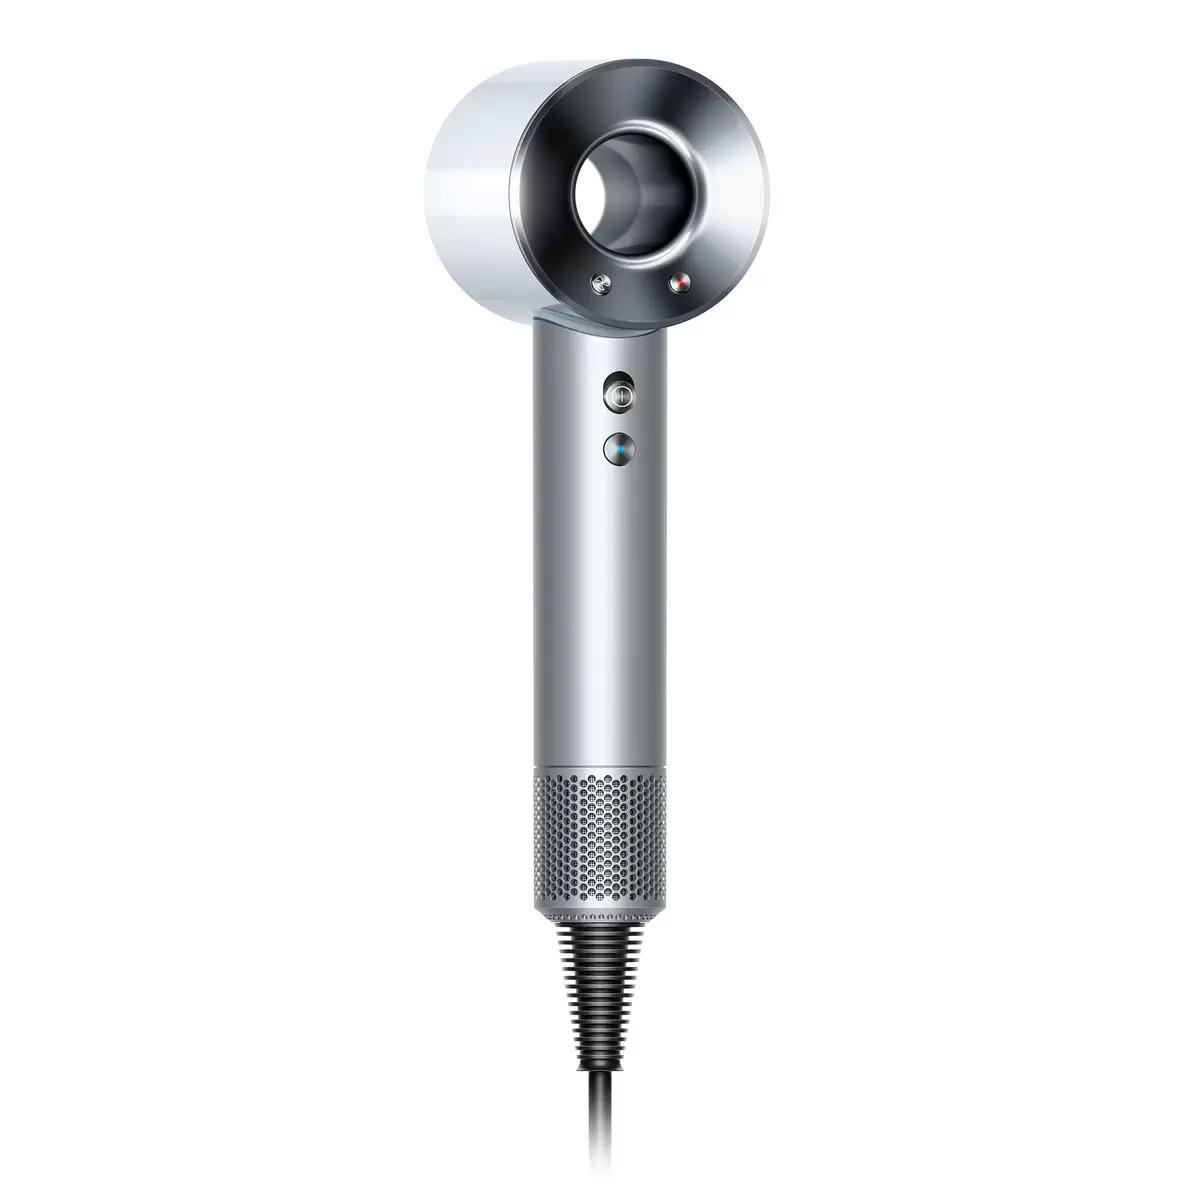 Dyson Supersonic Latest Generation Hair Dryer for $199.99 Shipped